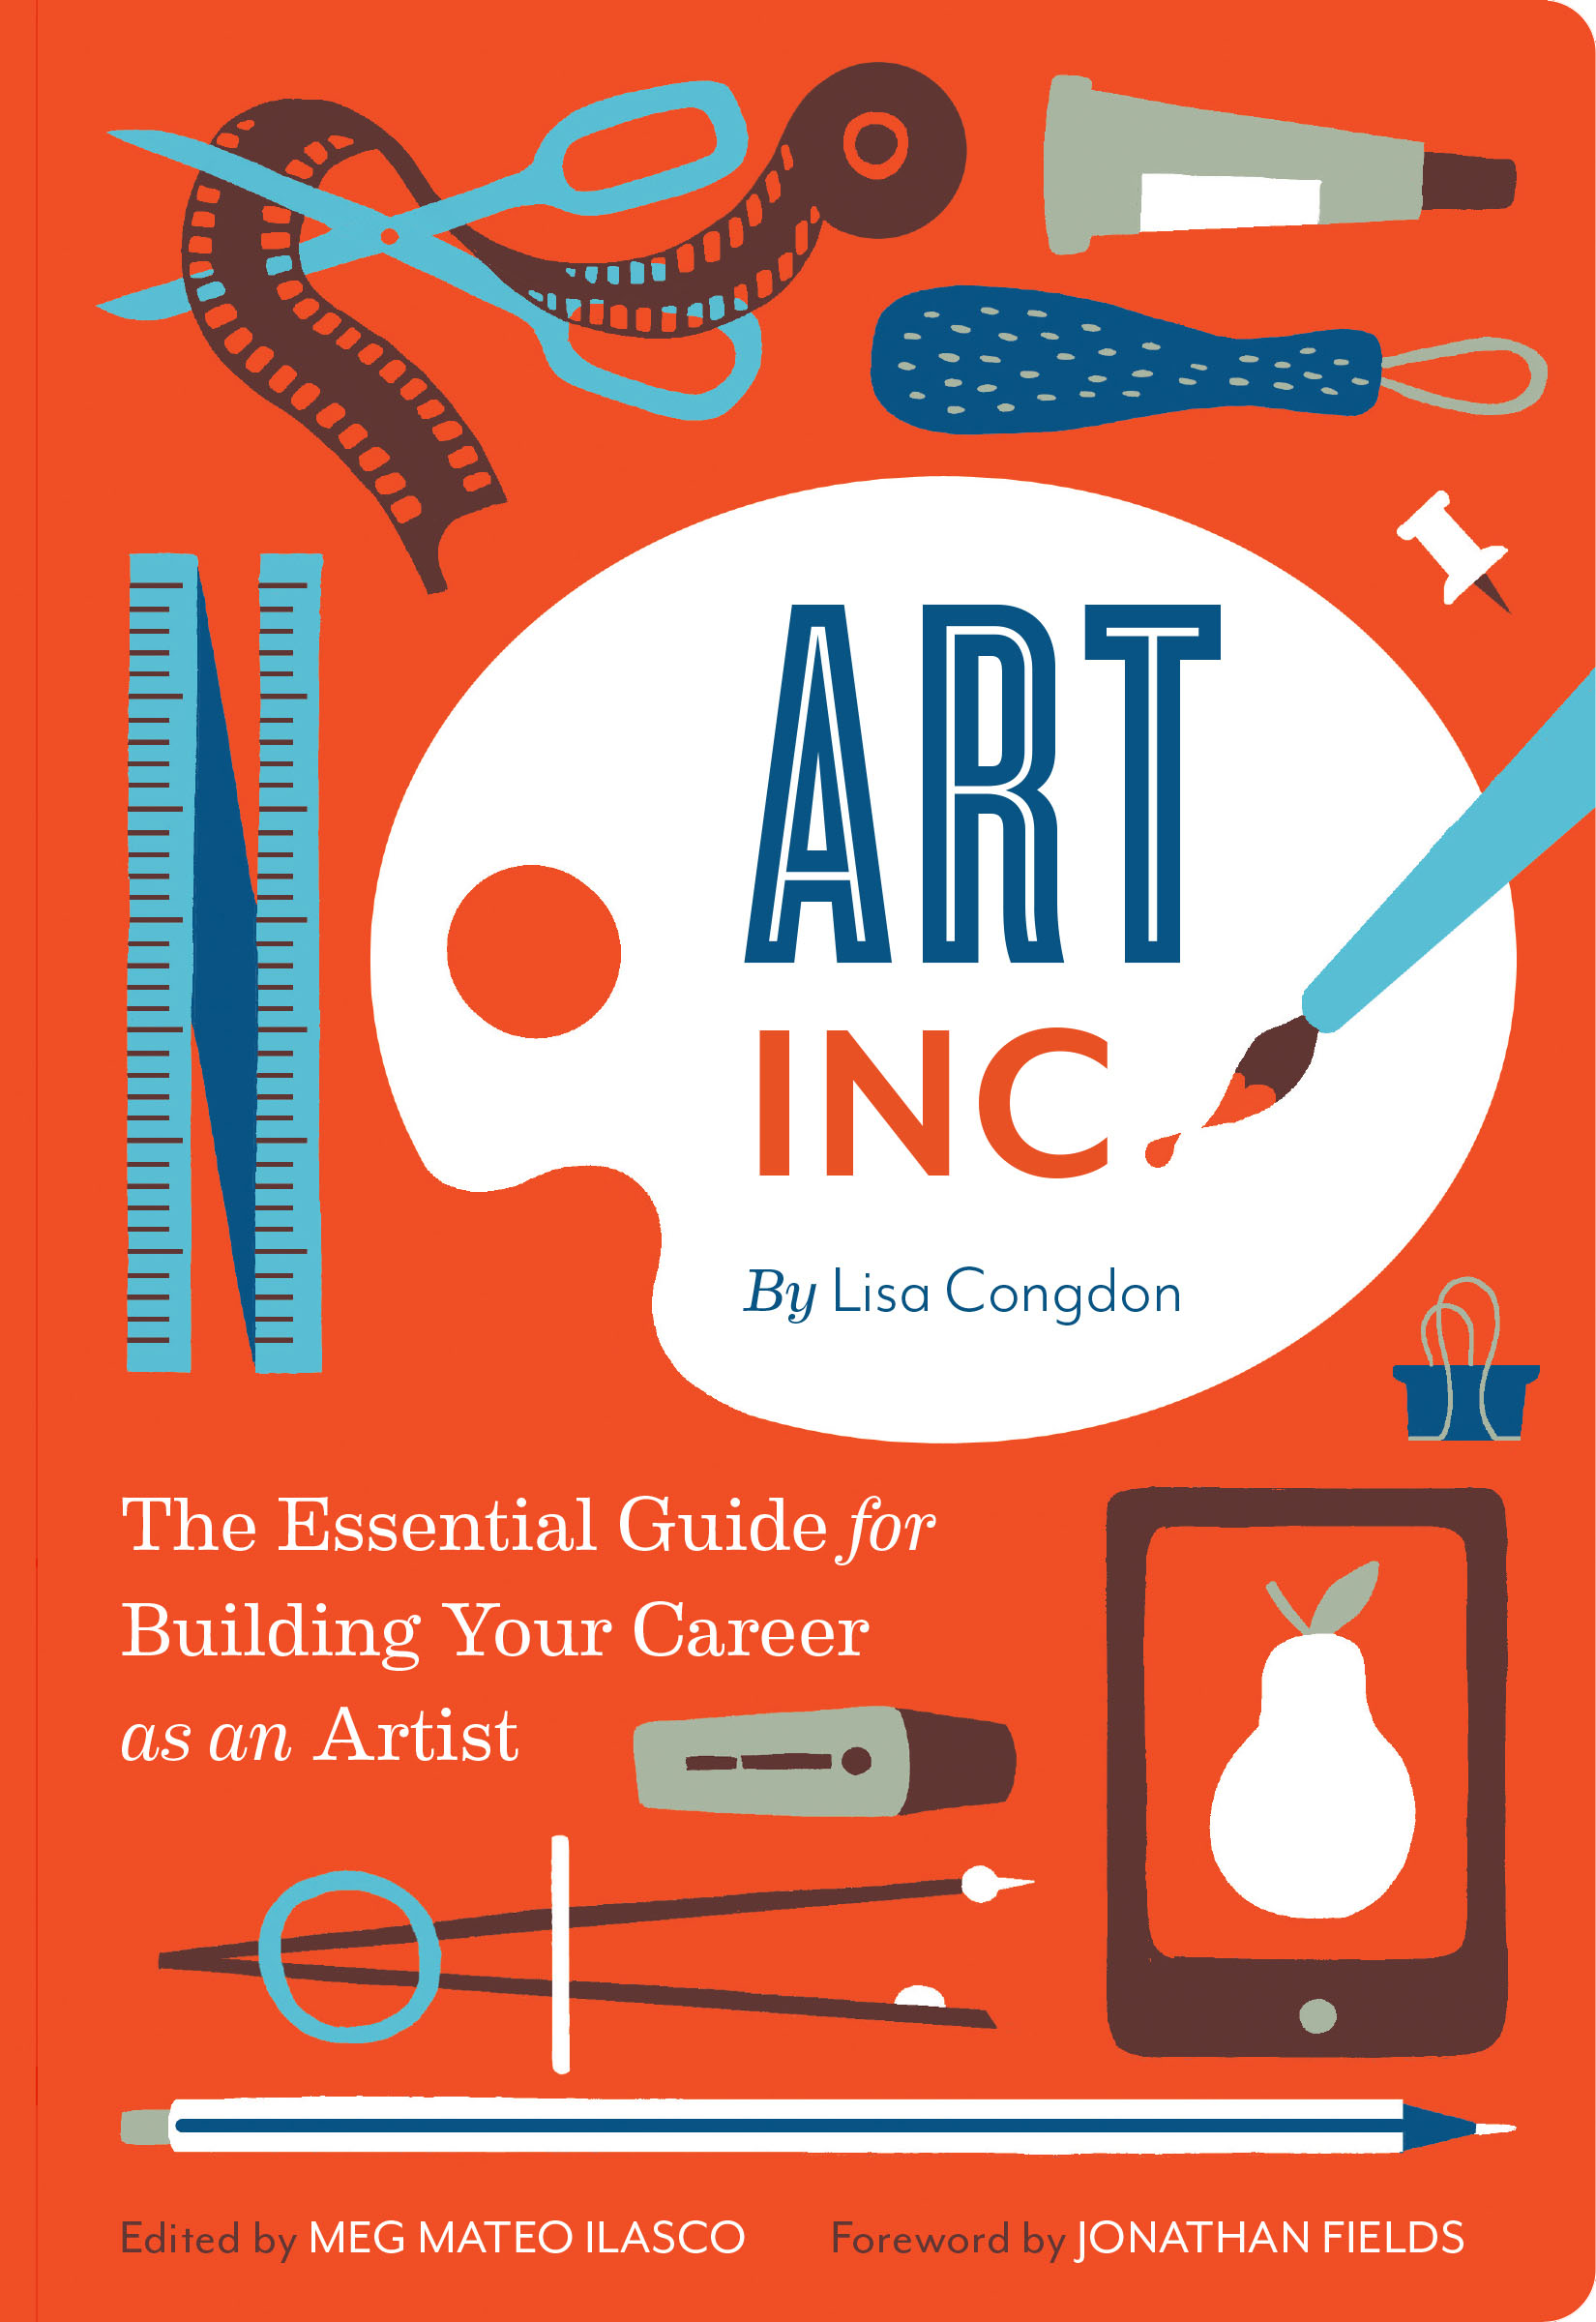 NYC Launch: Art, Inc. by Lisa Congdon, with Grace Bonney